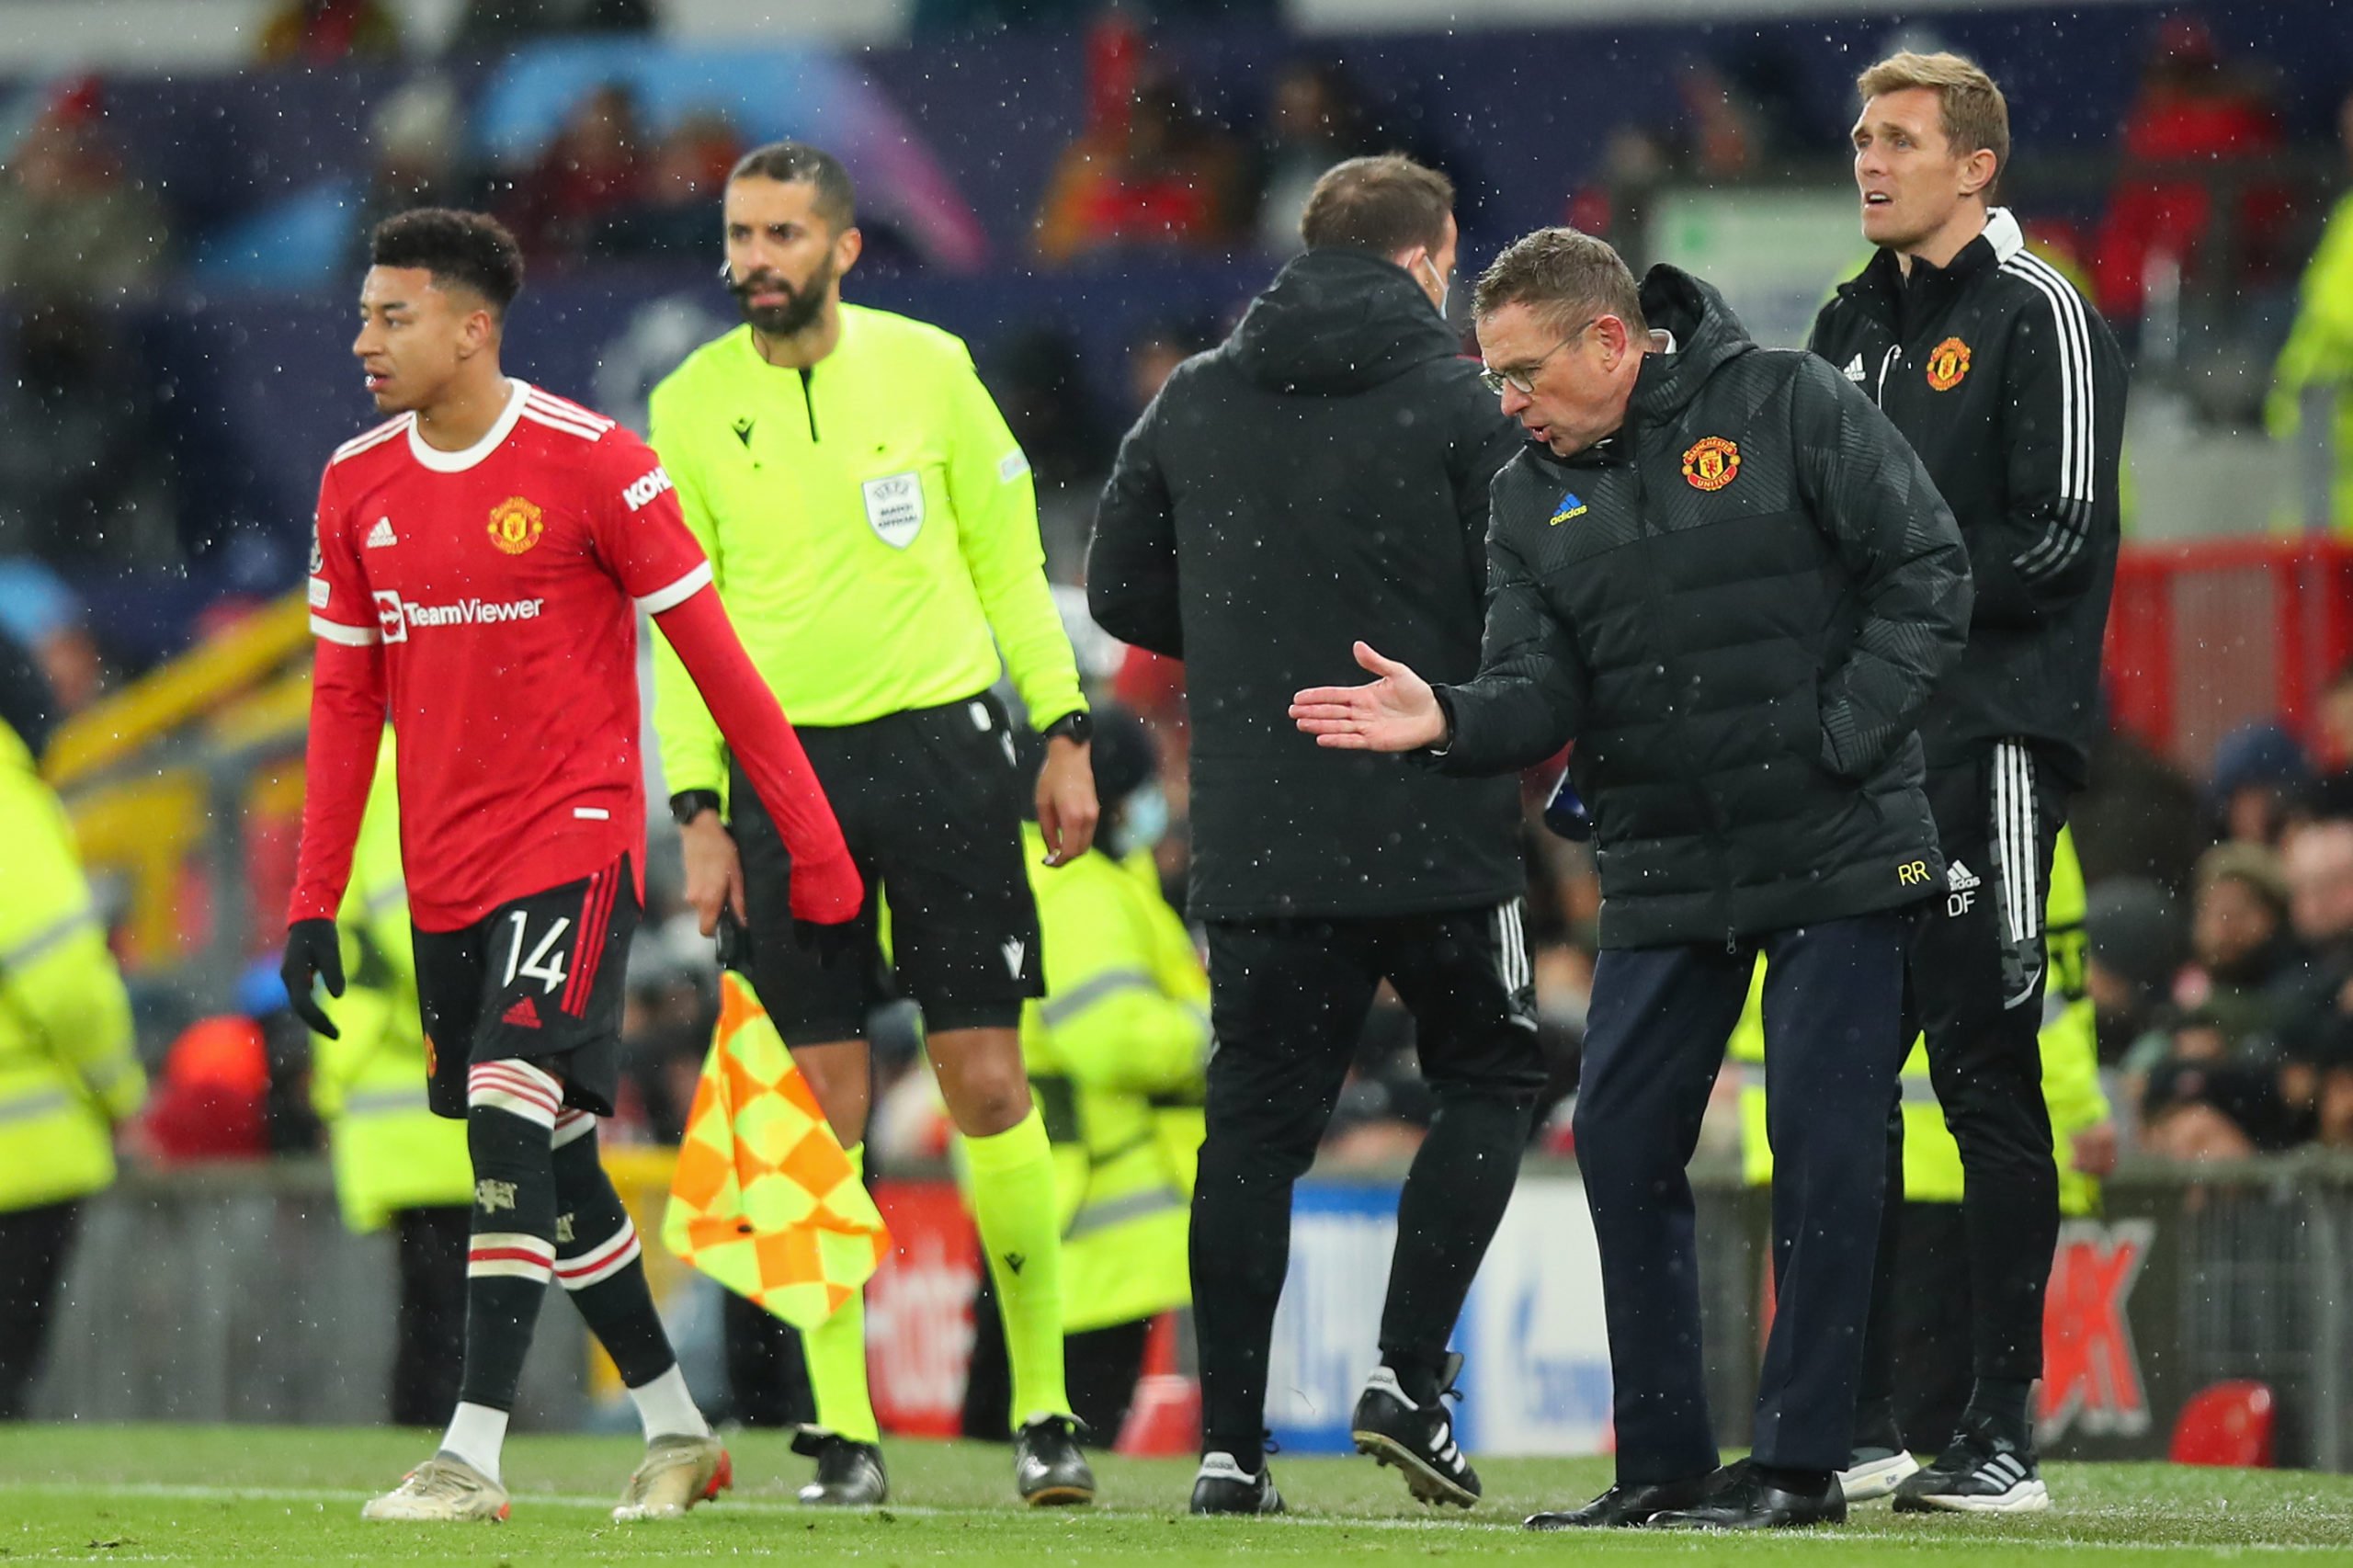 Ralf Rangnick has told Jesse Lingard he can leave